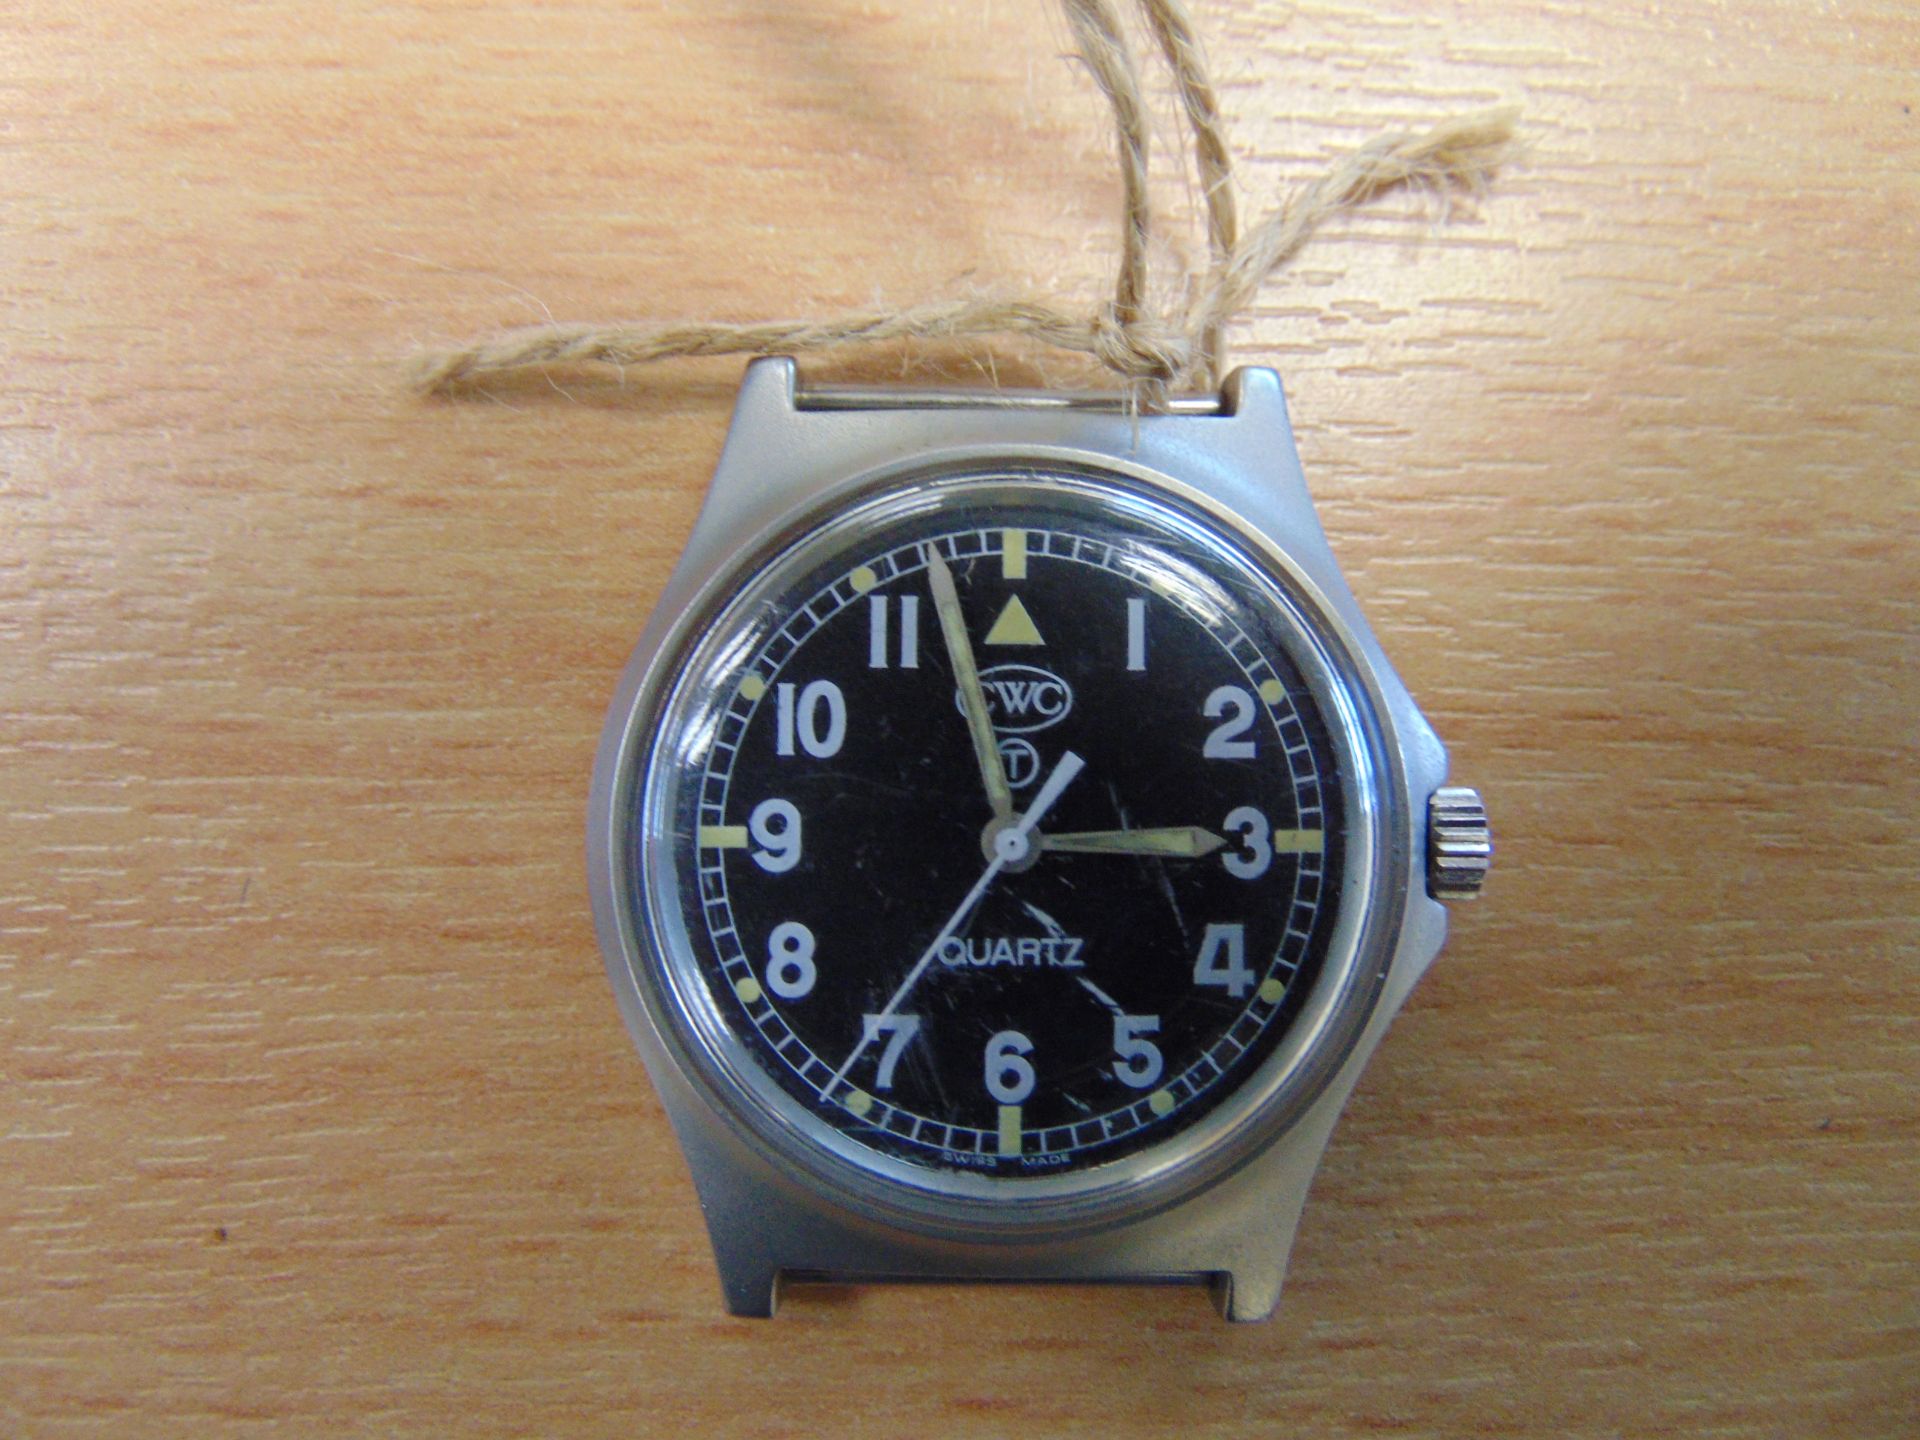 CWC (Cabot Watch Co Switzerland) British Army W10 Service Watch, Water Resistant to 5 ATM